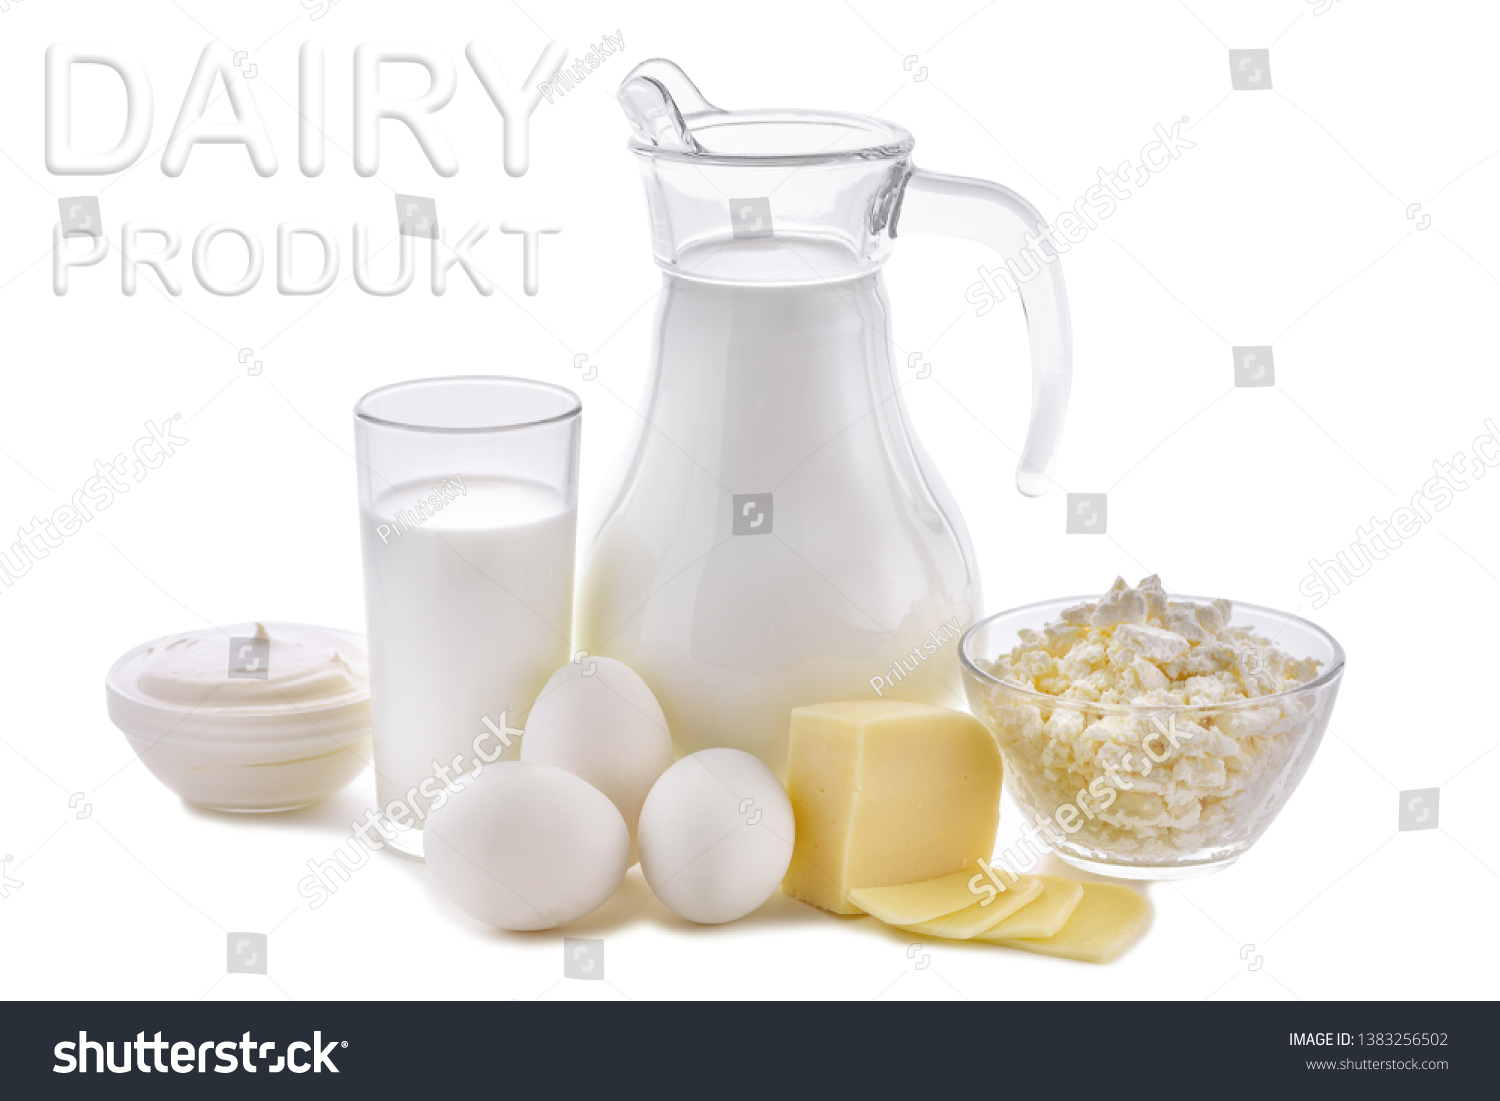 Dairy products on white background. Milk, cottage cheese, sour cream, cheese, butter, eggs, still life from healthy dairy products. Dairy nutrition is good for children's health. #1383256502